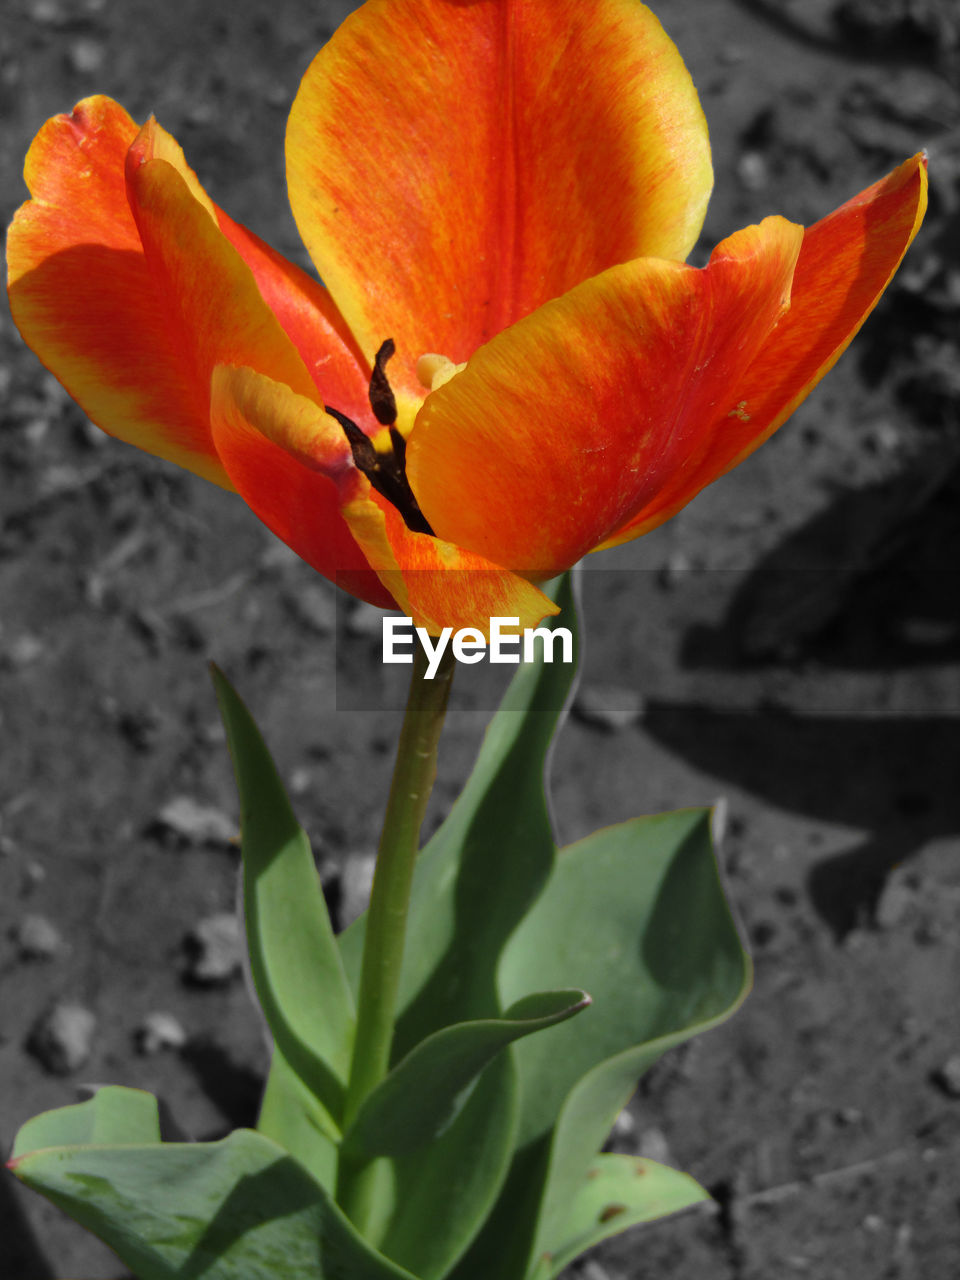 CLOSE-UP OF ORANGE DAY LILY FLOWERS